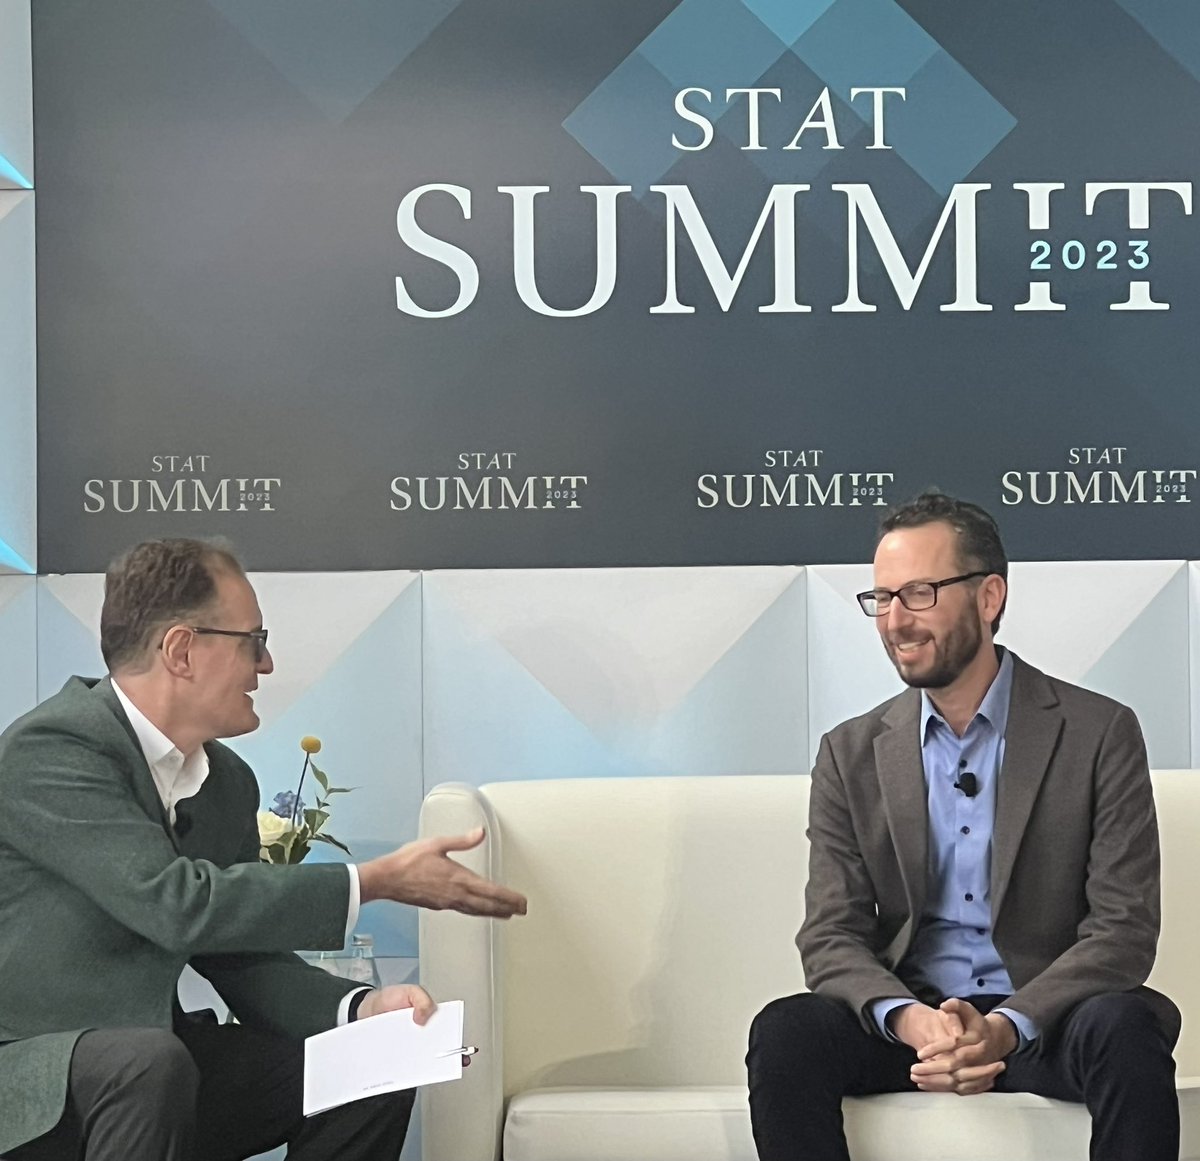 “All of us in this industry want to make #medicines that help people. It’s good for the industry. It’s good for society.” — Daniel Skovronsky @EliLillyandCo

@matthewherper @statnews #STATSUMMIT